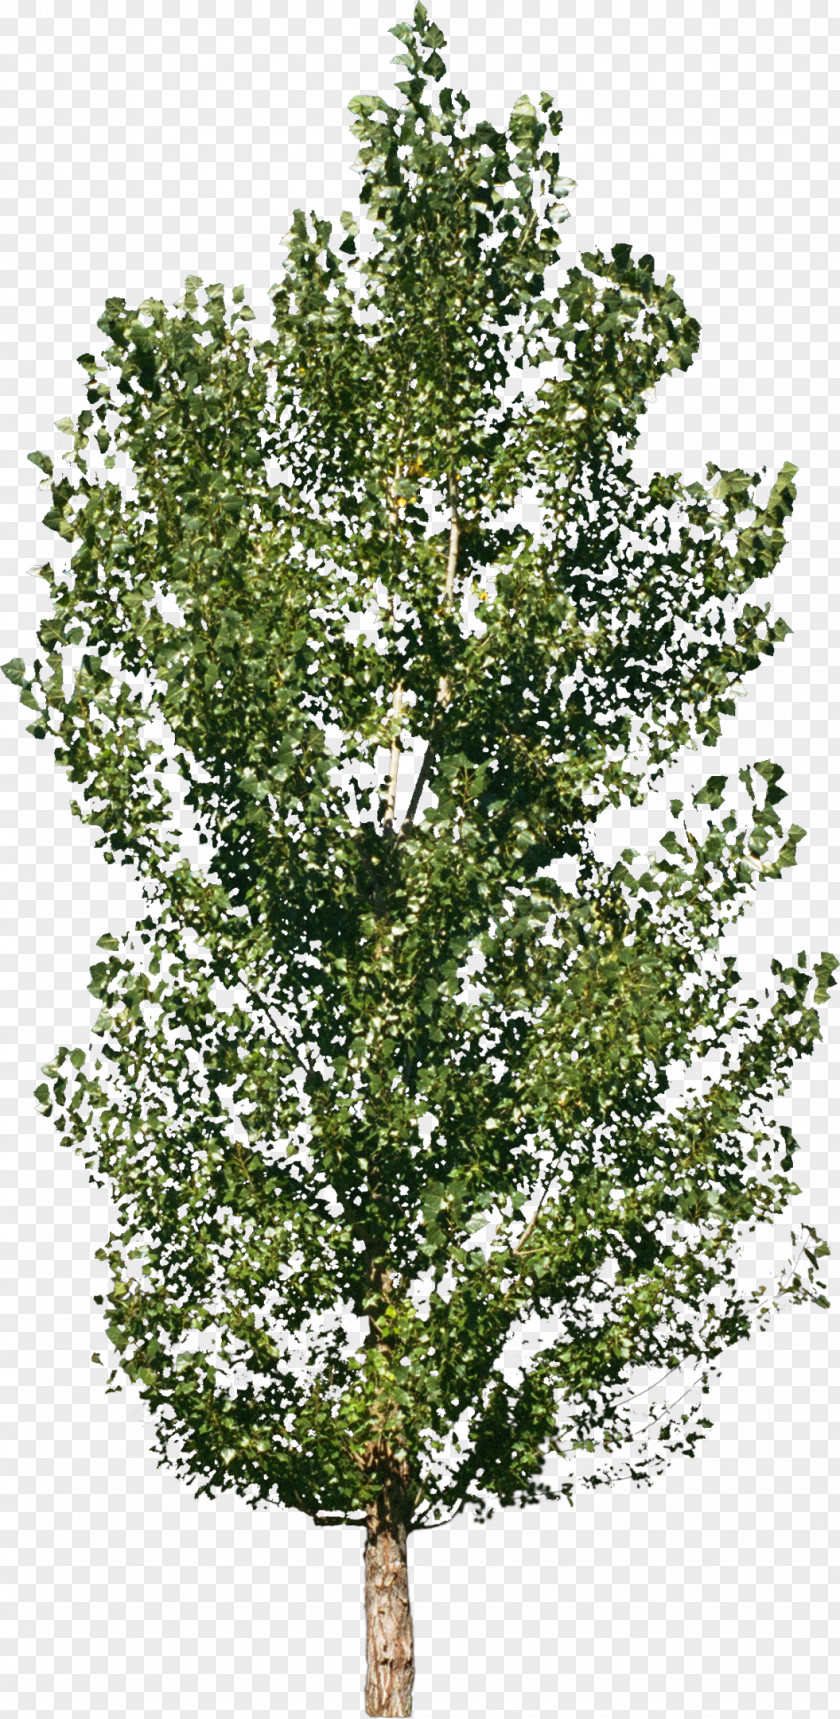 Bushes Tree Forest Material Shrub PNG